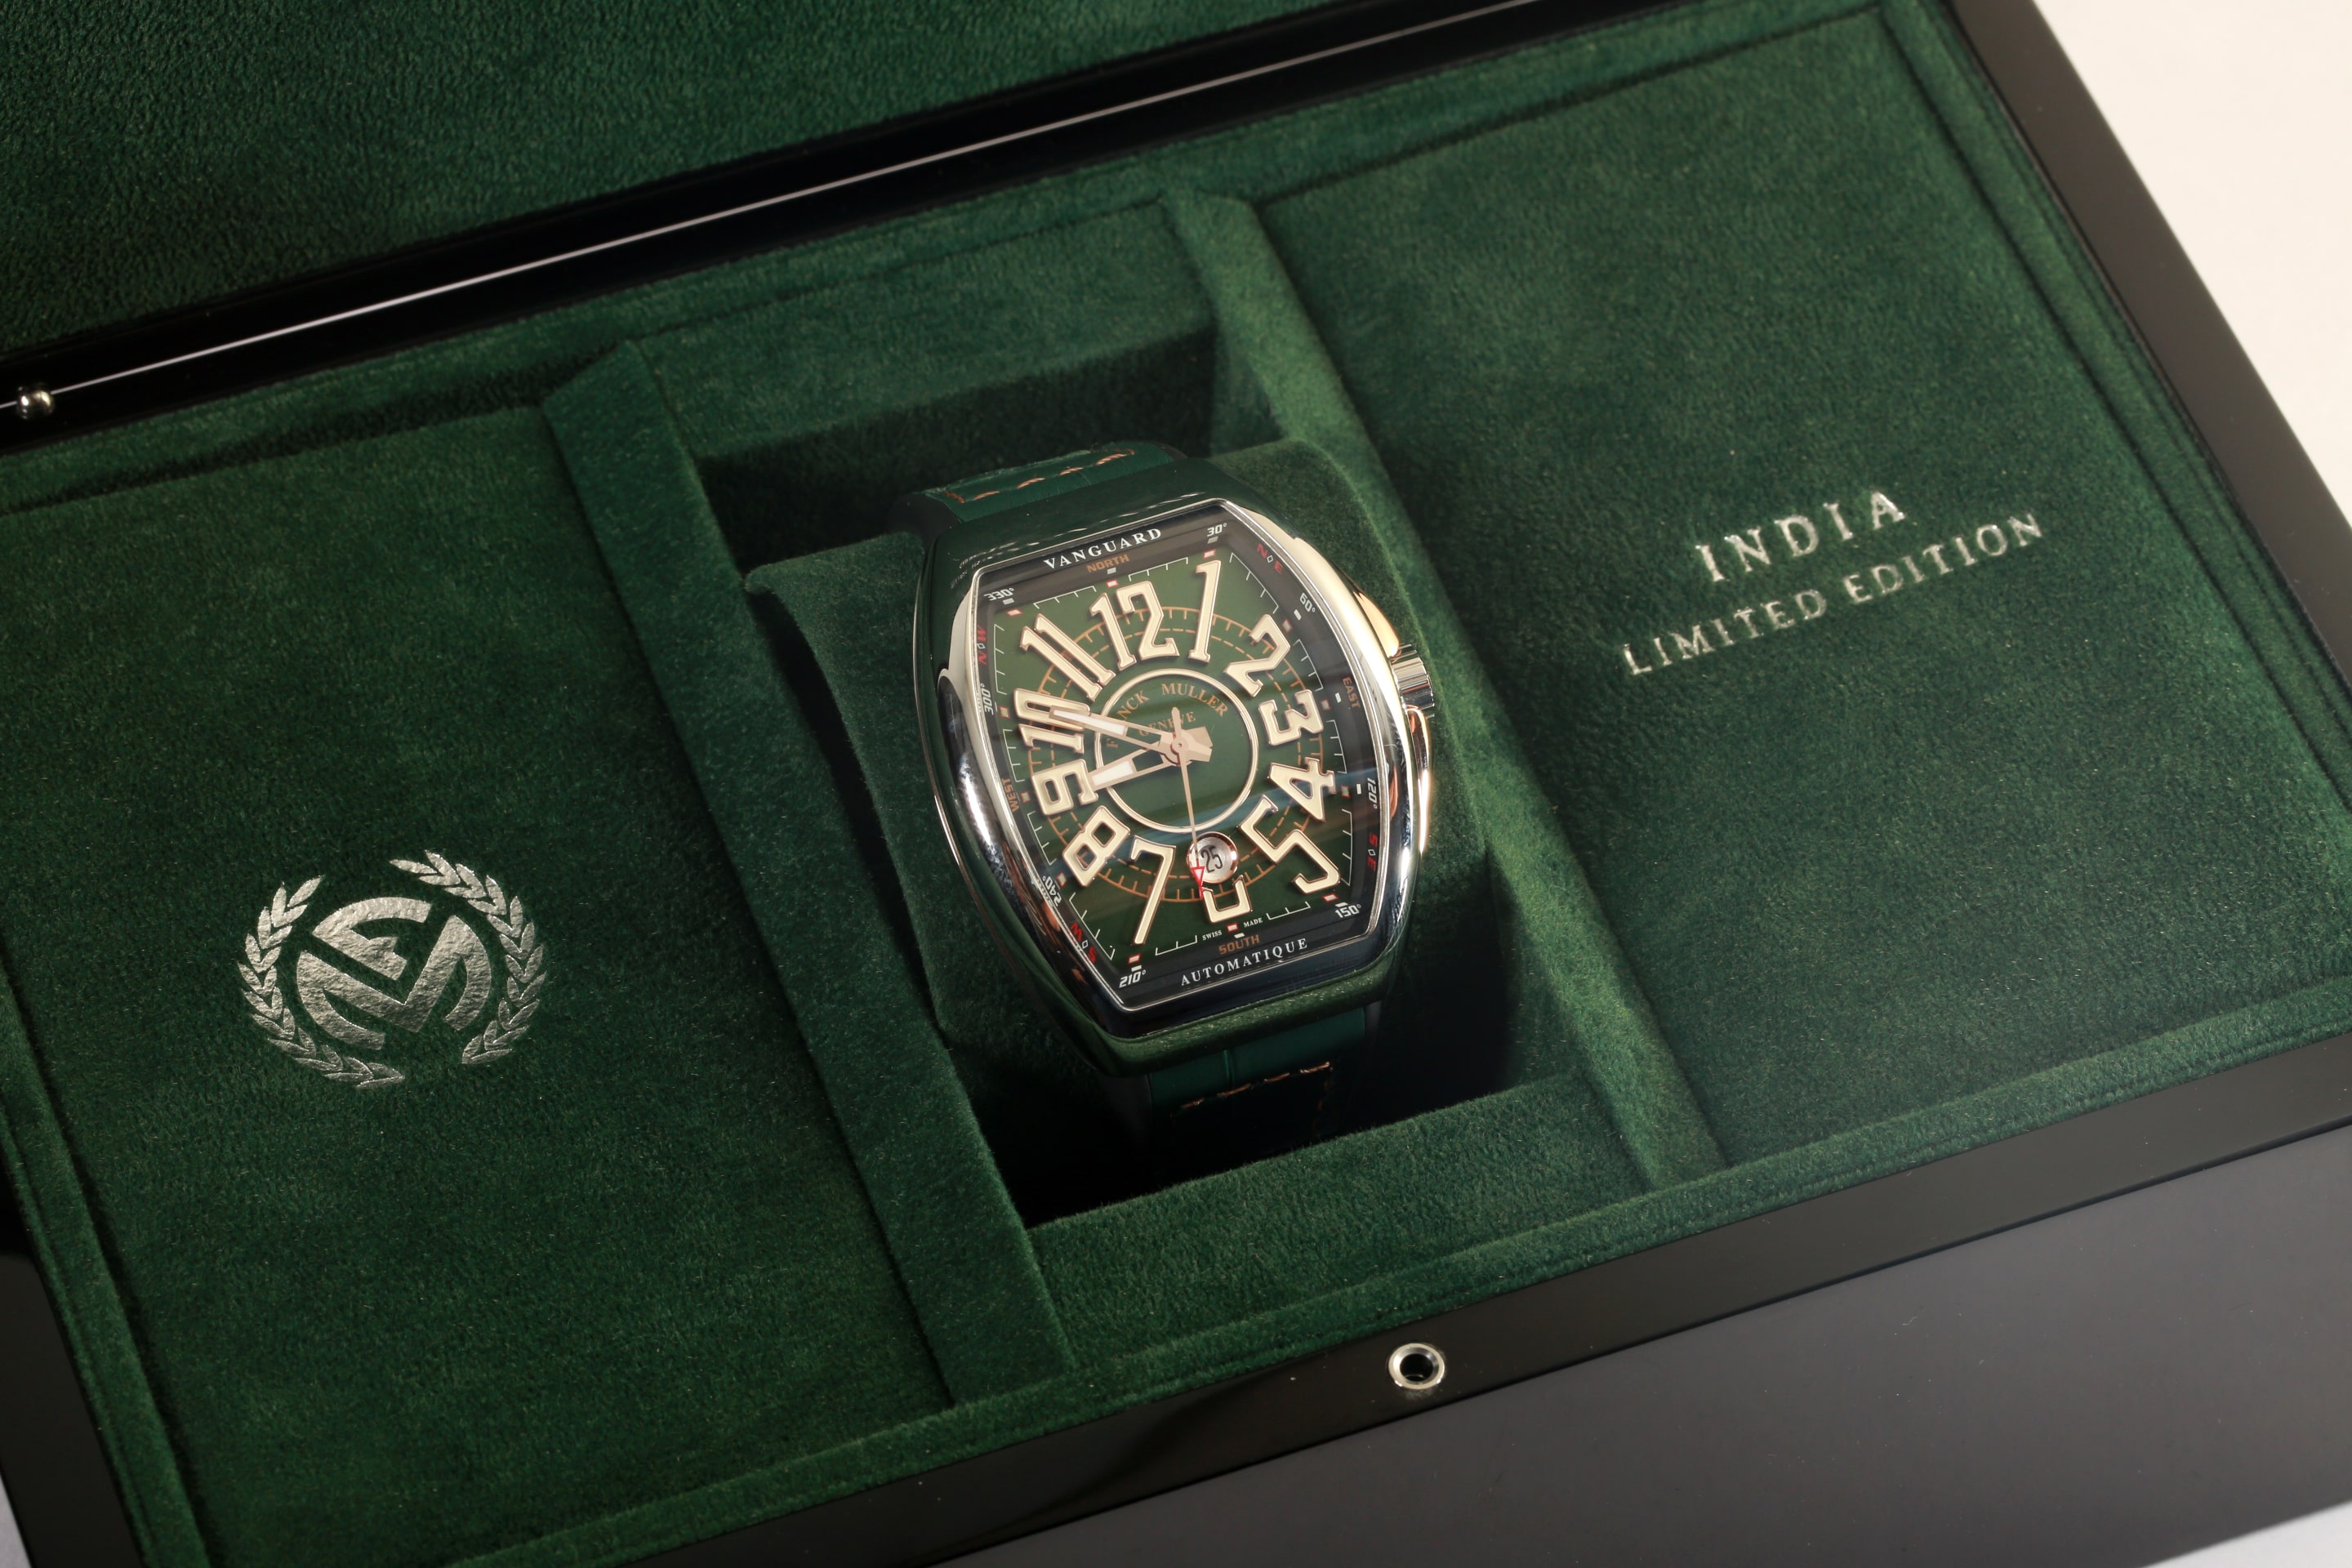  Franck Muller's India limited edition collection timepiece exclusively retailed at Kapoor Watch Company